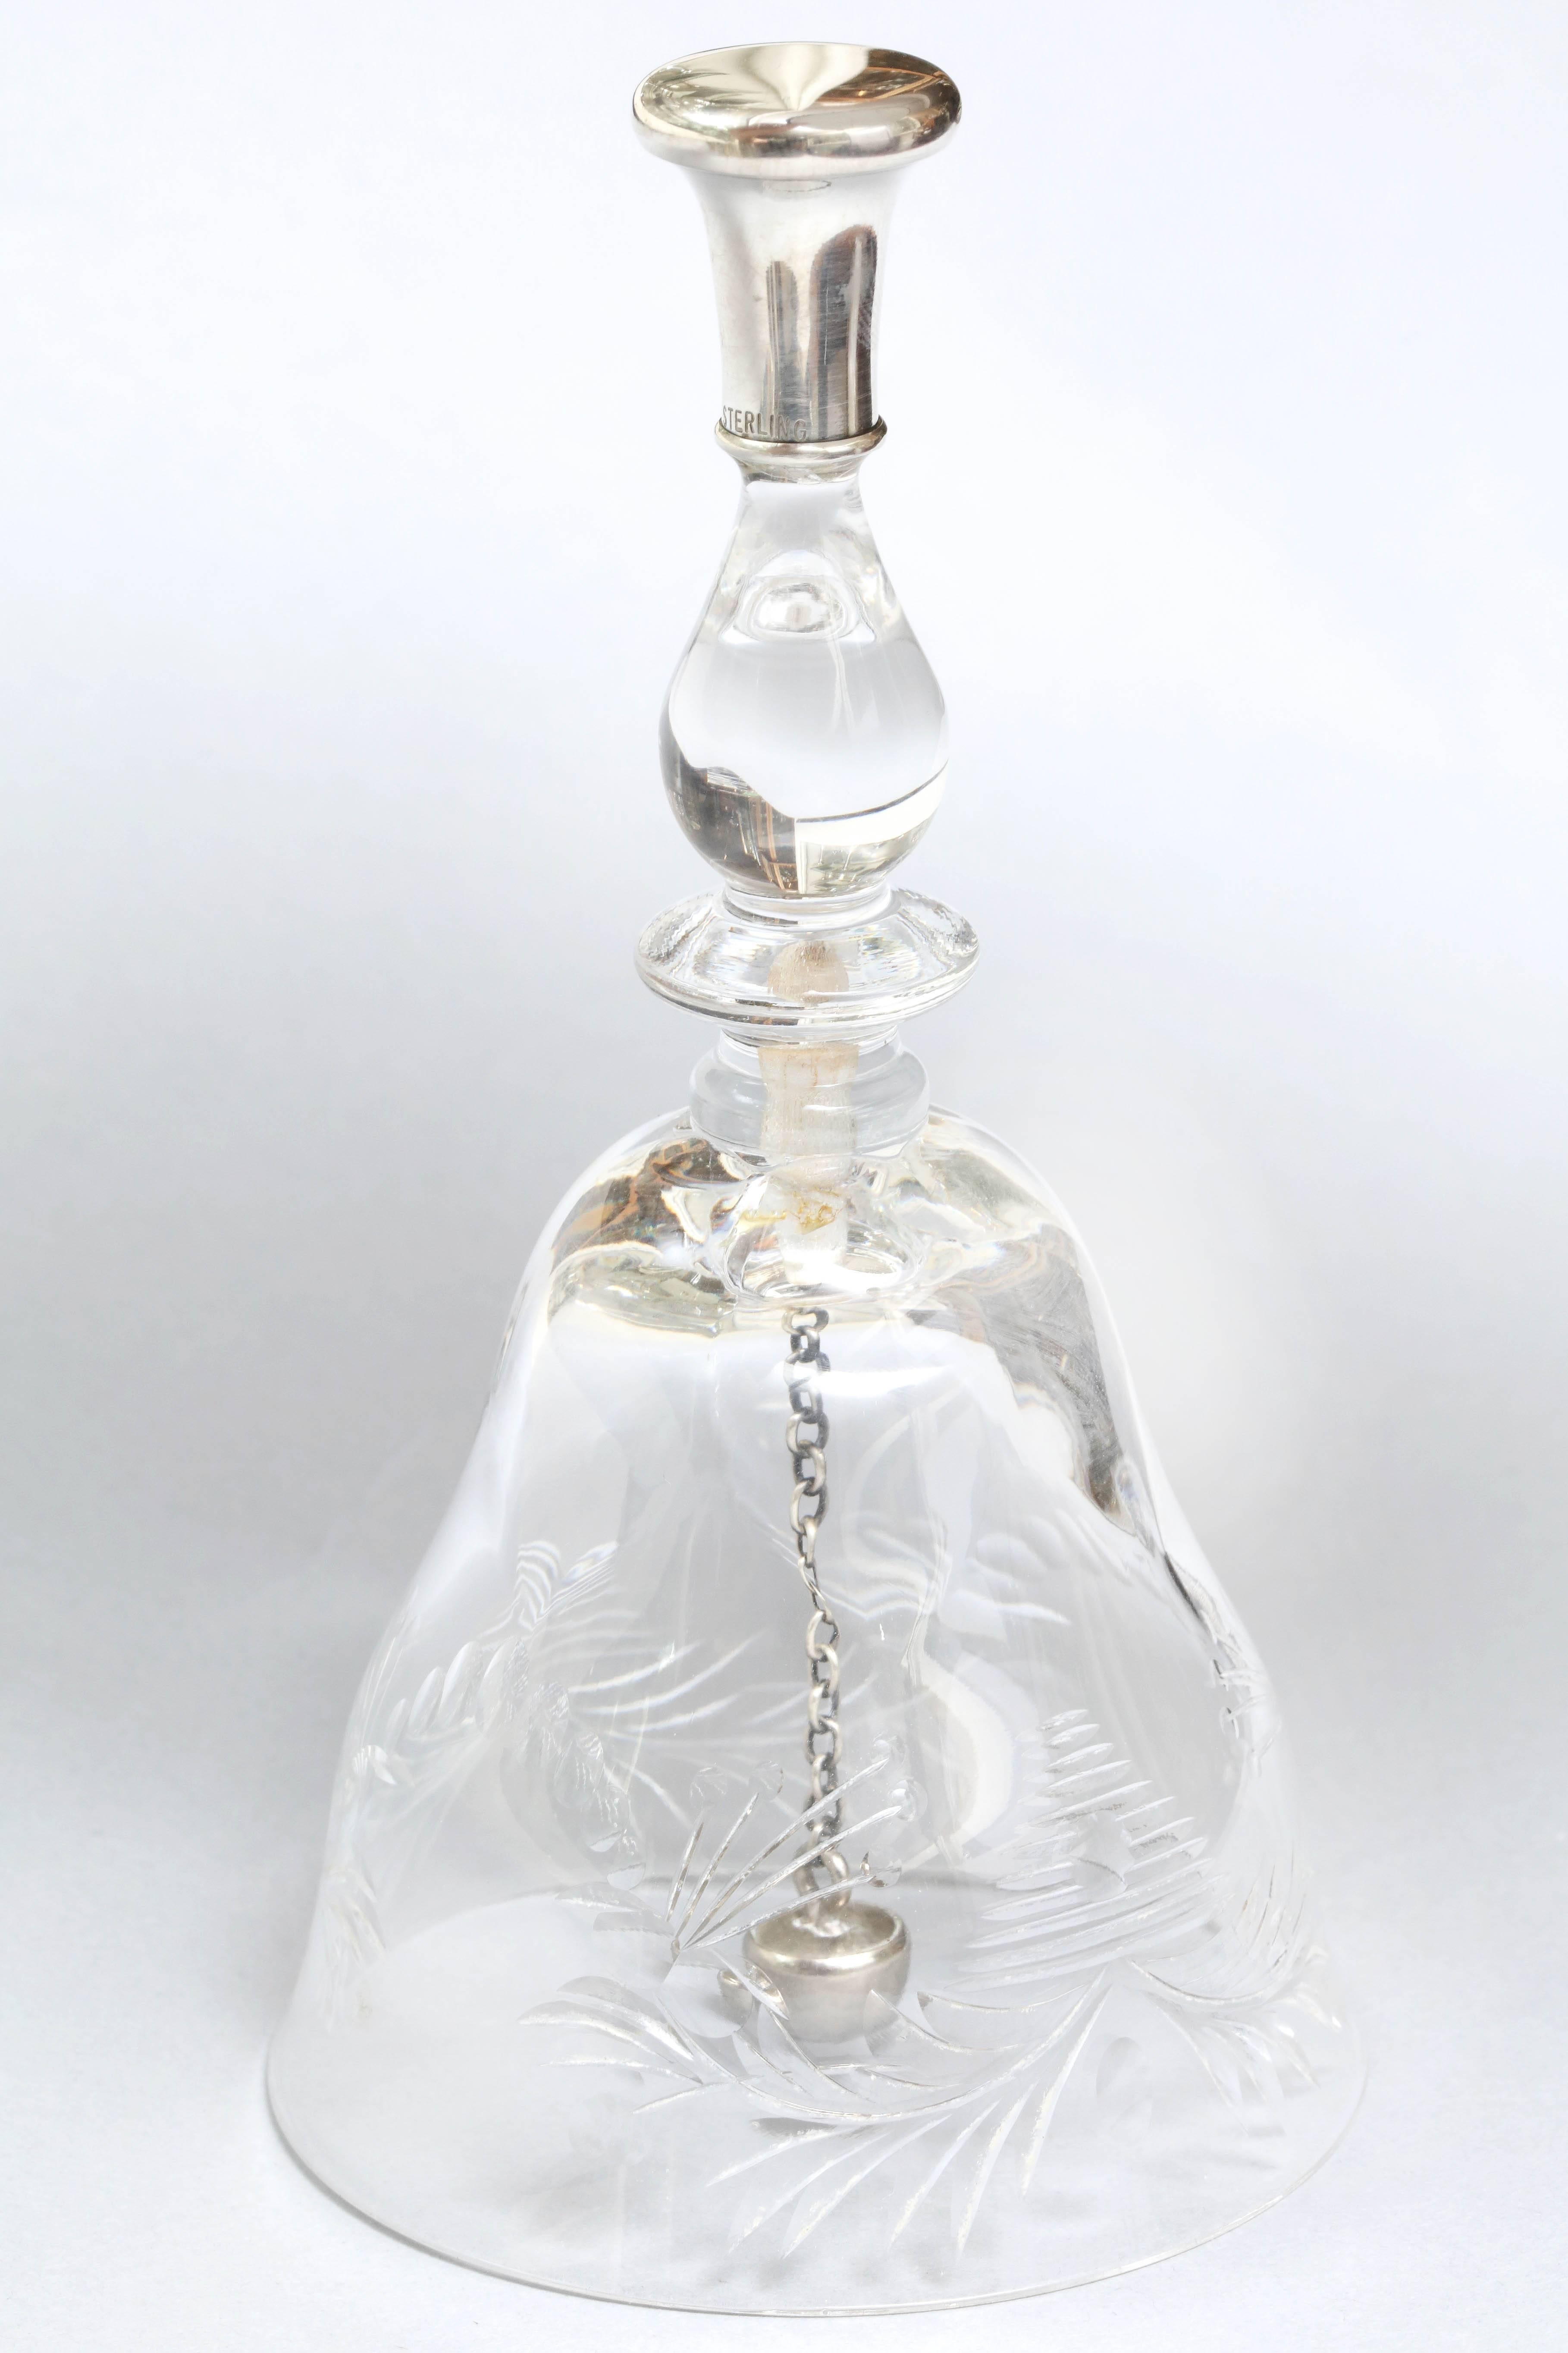 Beautiful, Edwardian, sterling silver mounted, wheel cut crystal, dinner bell, American, circa 1905. Sterling silver clapper produces a lovely, clear sound. Measure: 5 3/4 inches high x 3 inches diameter across base. Lovely, delicate cutting on